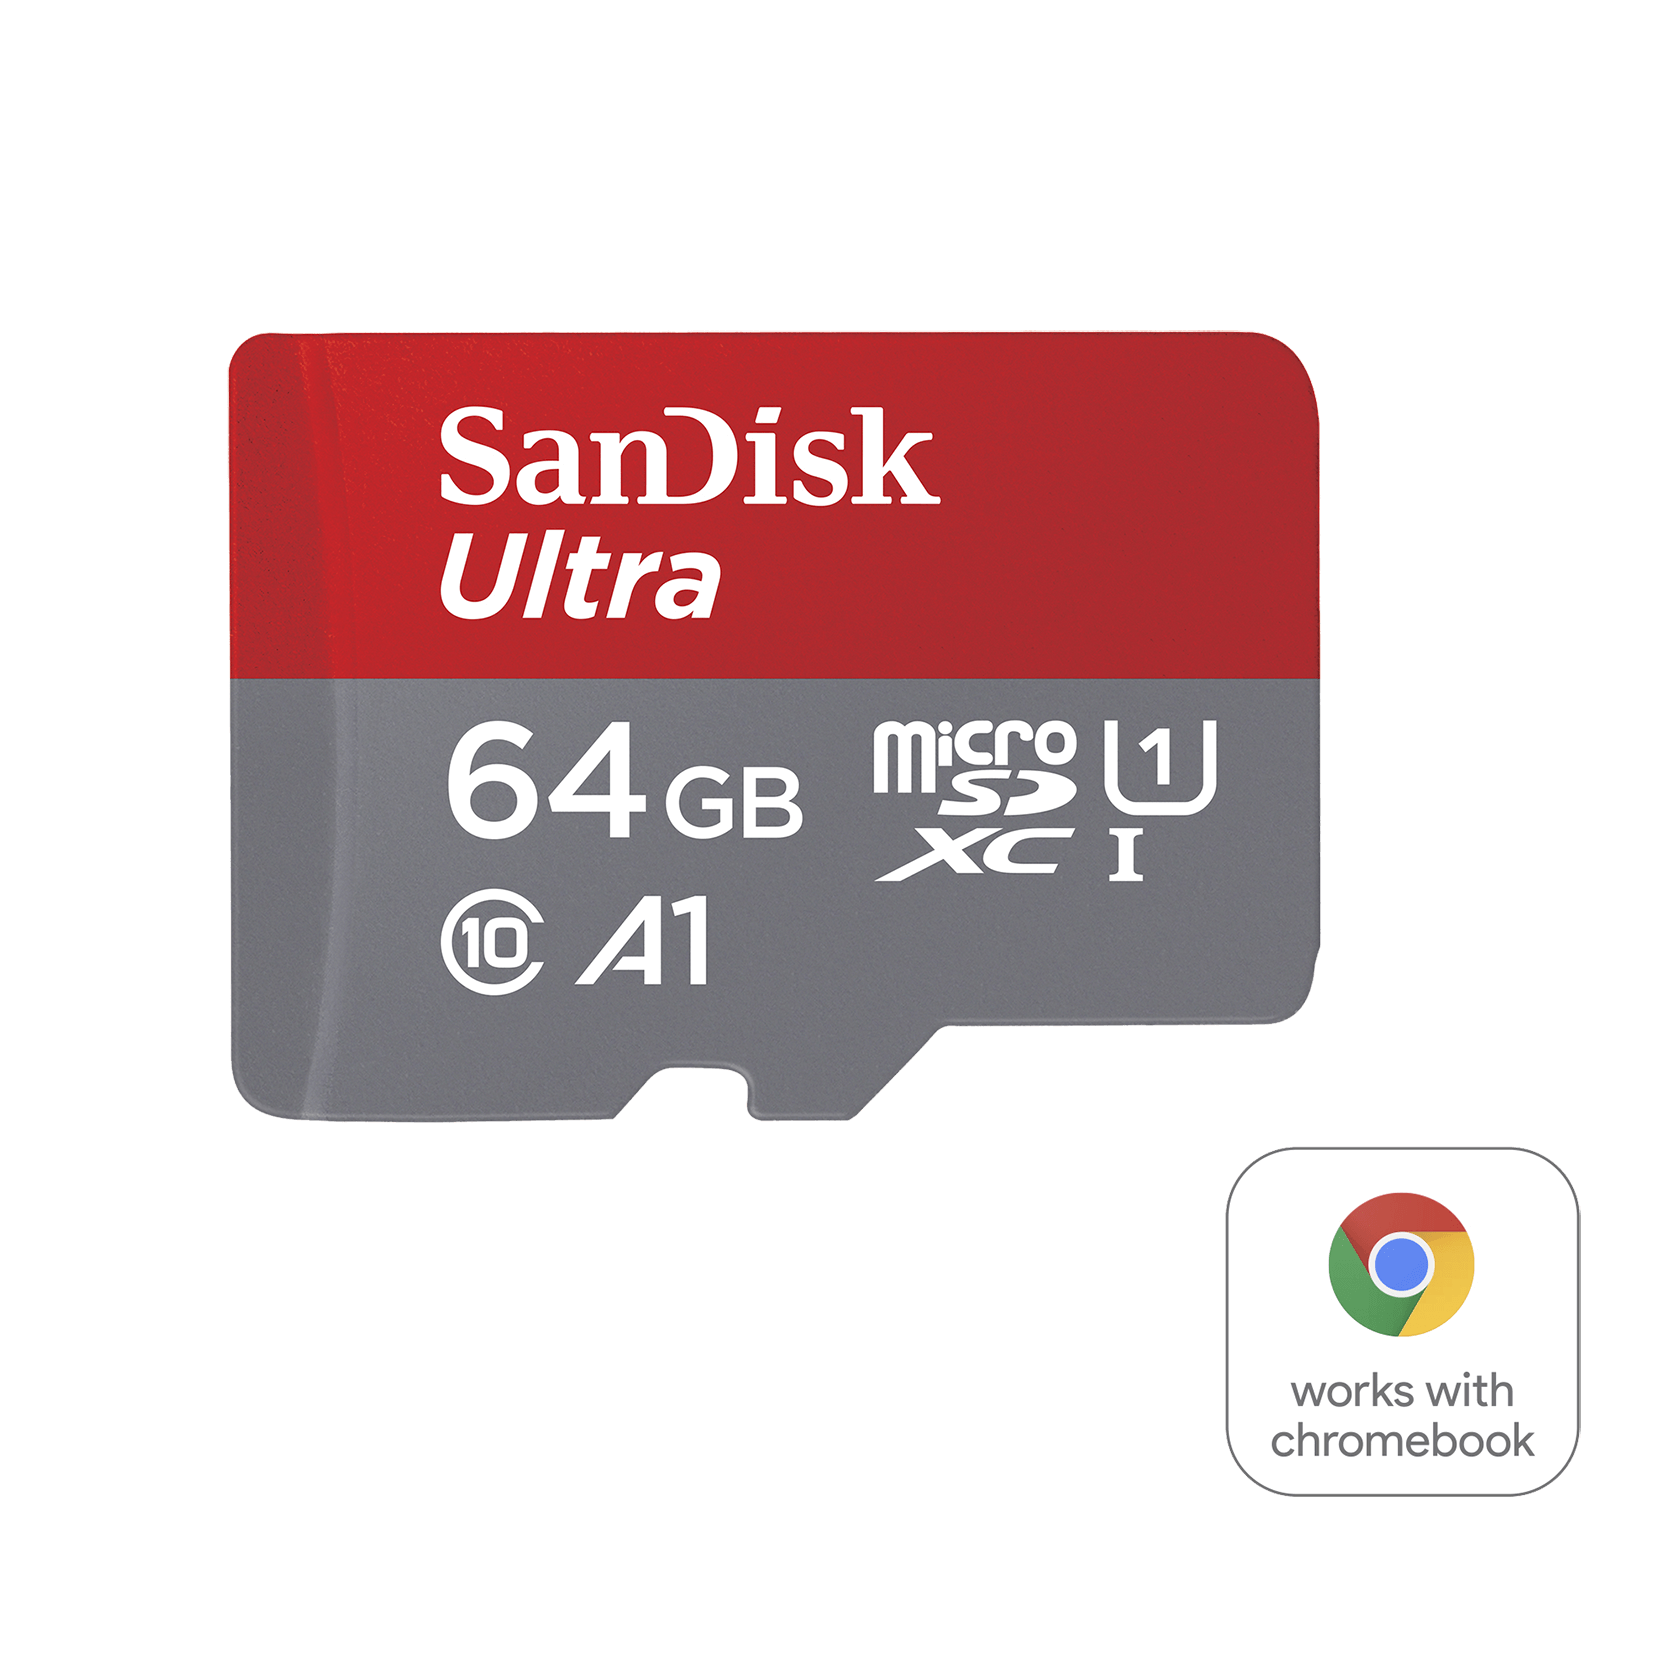 SanDisk Ultra® MicroSDXC™ UHS-I Card with Adapter - 64GB - SDSQUA4-064G-GN6FA